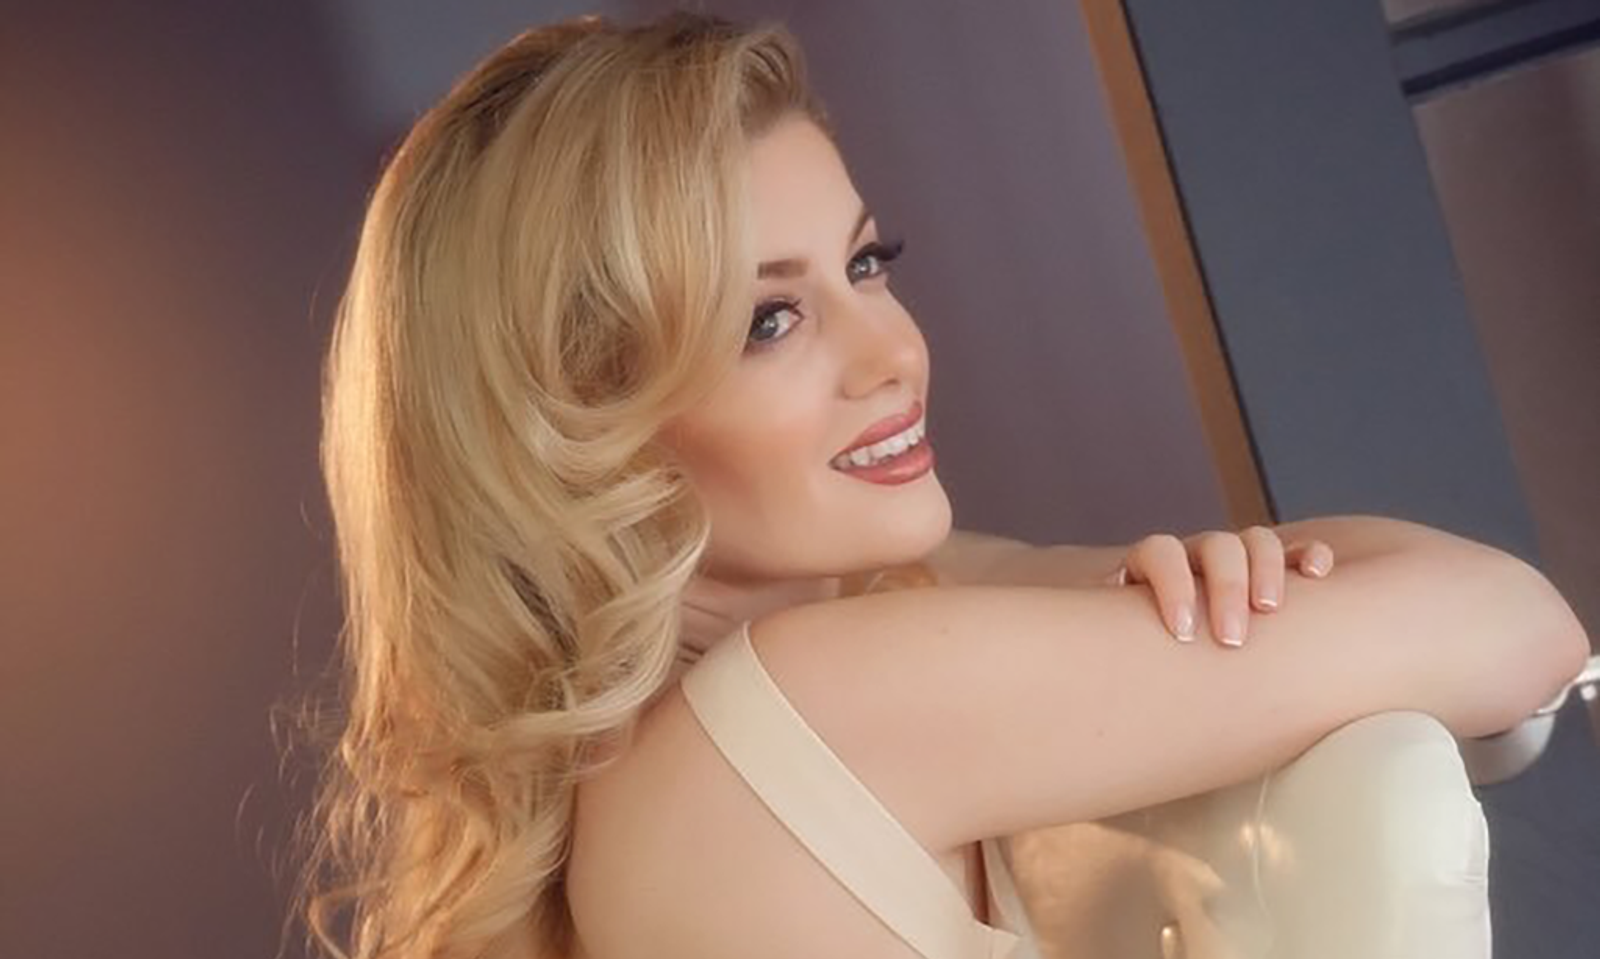 CAM4 Brand Ambassador Charlotte Stokely Treats Fans To Show Tues.